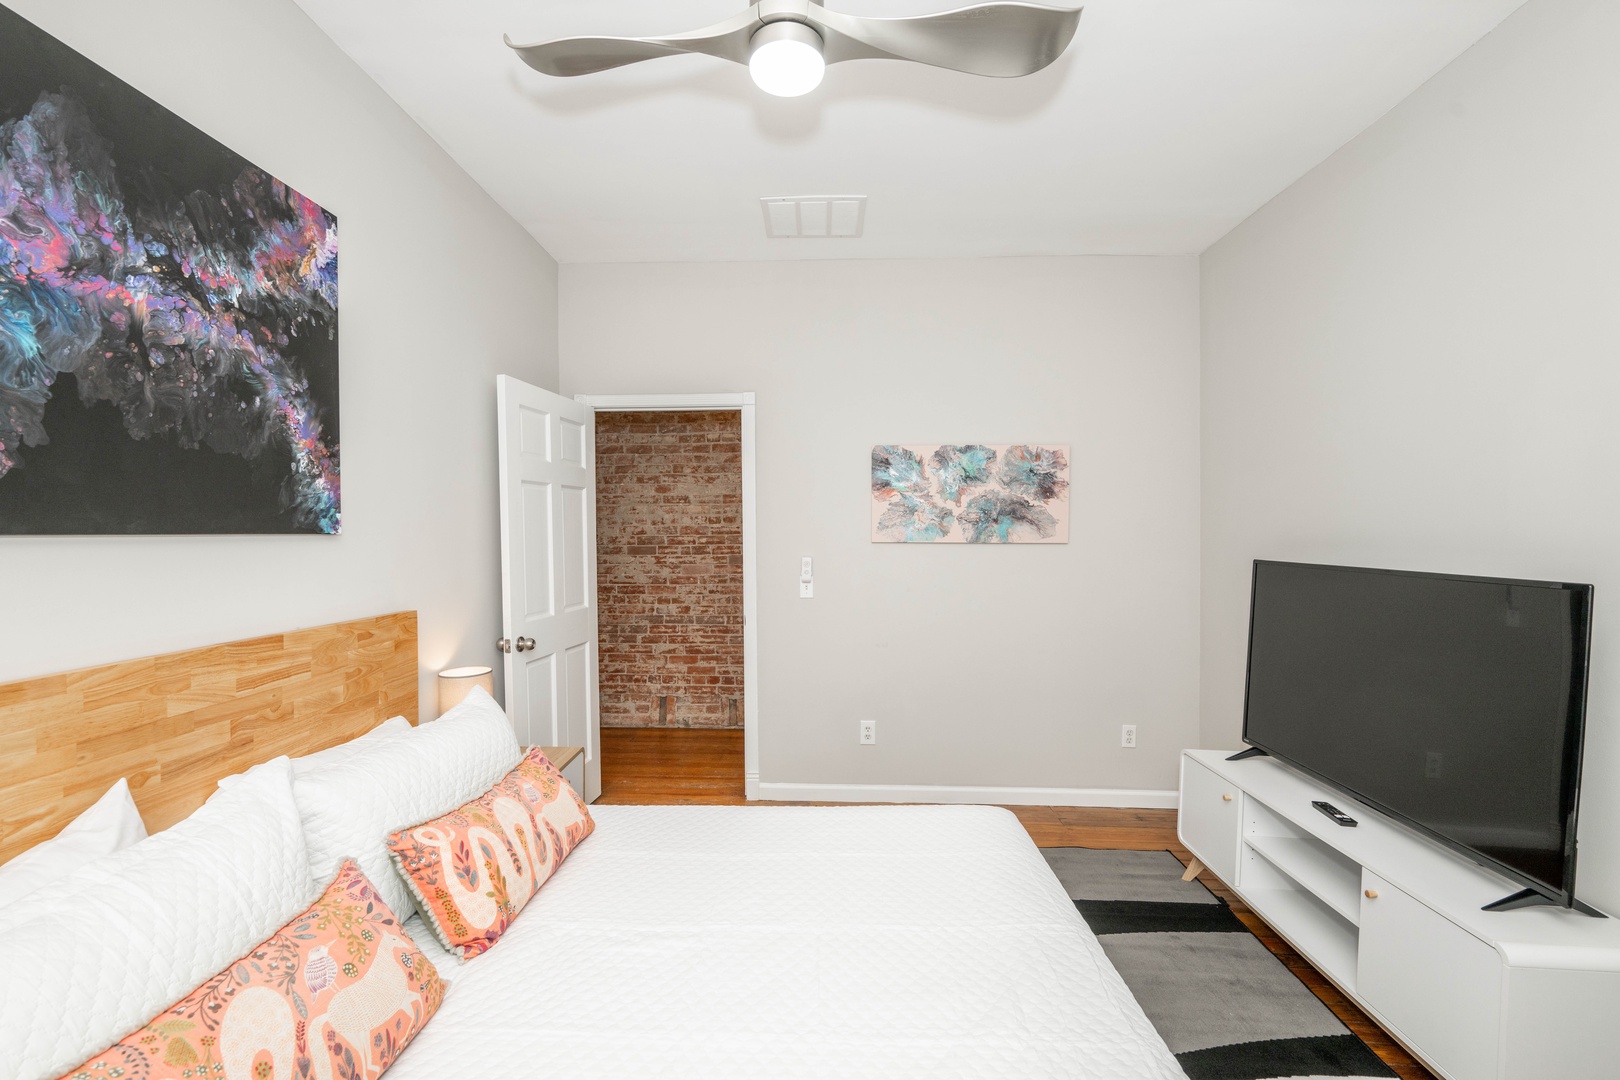 The second bedroom sanctuary offers a king-sized bed & Smart TV